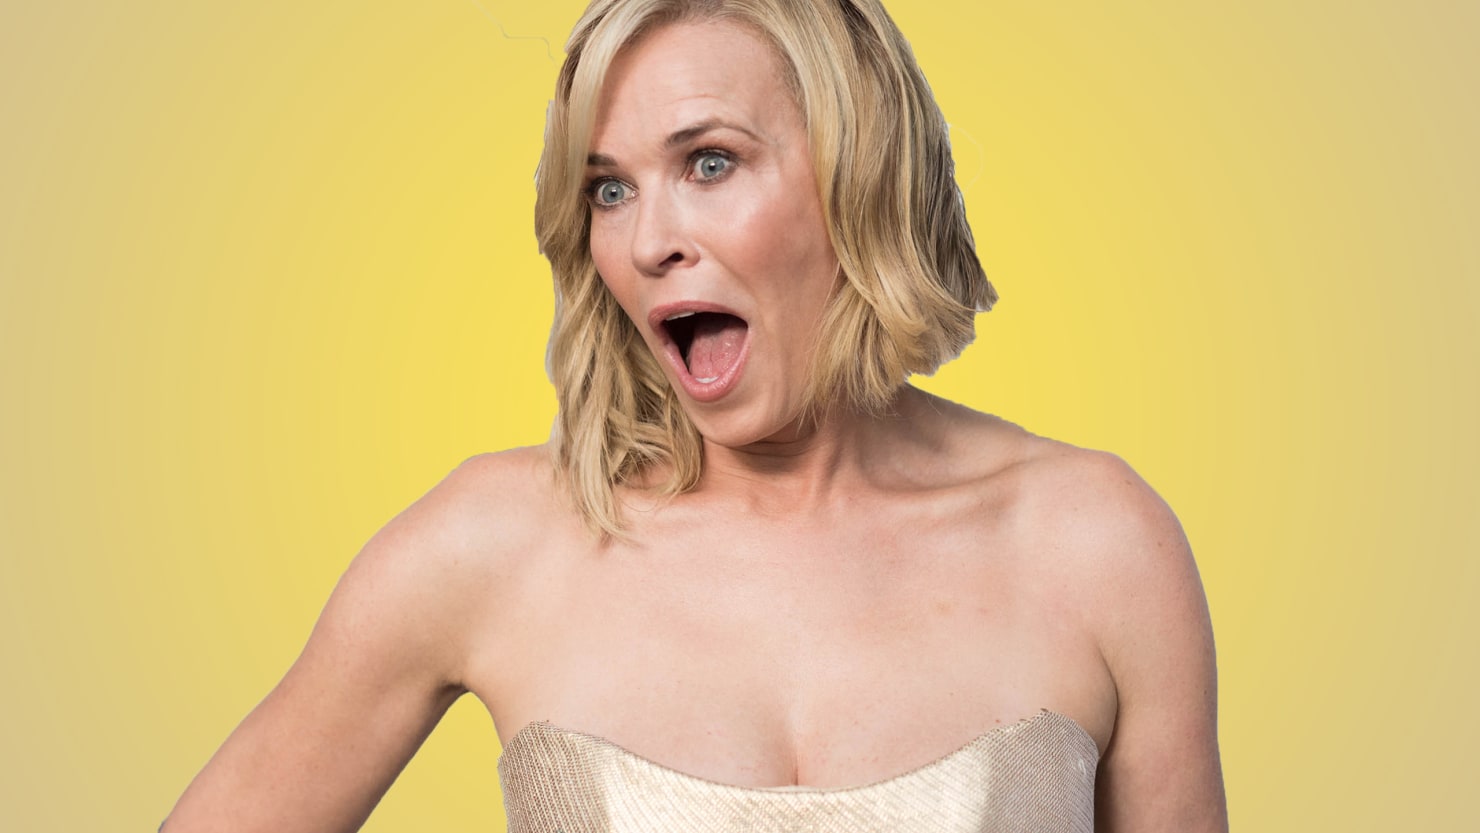 Chelsea Handler's Twitter Feed Has Officially Gone Off the Rails